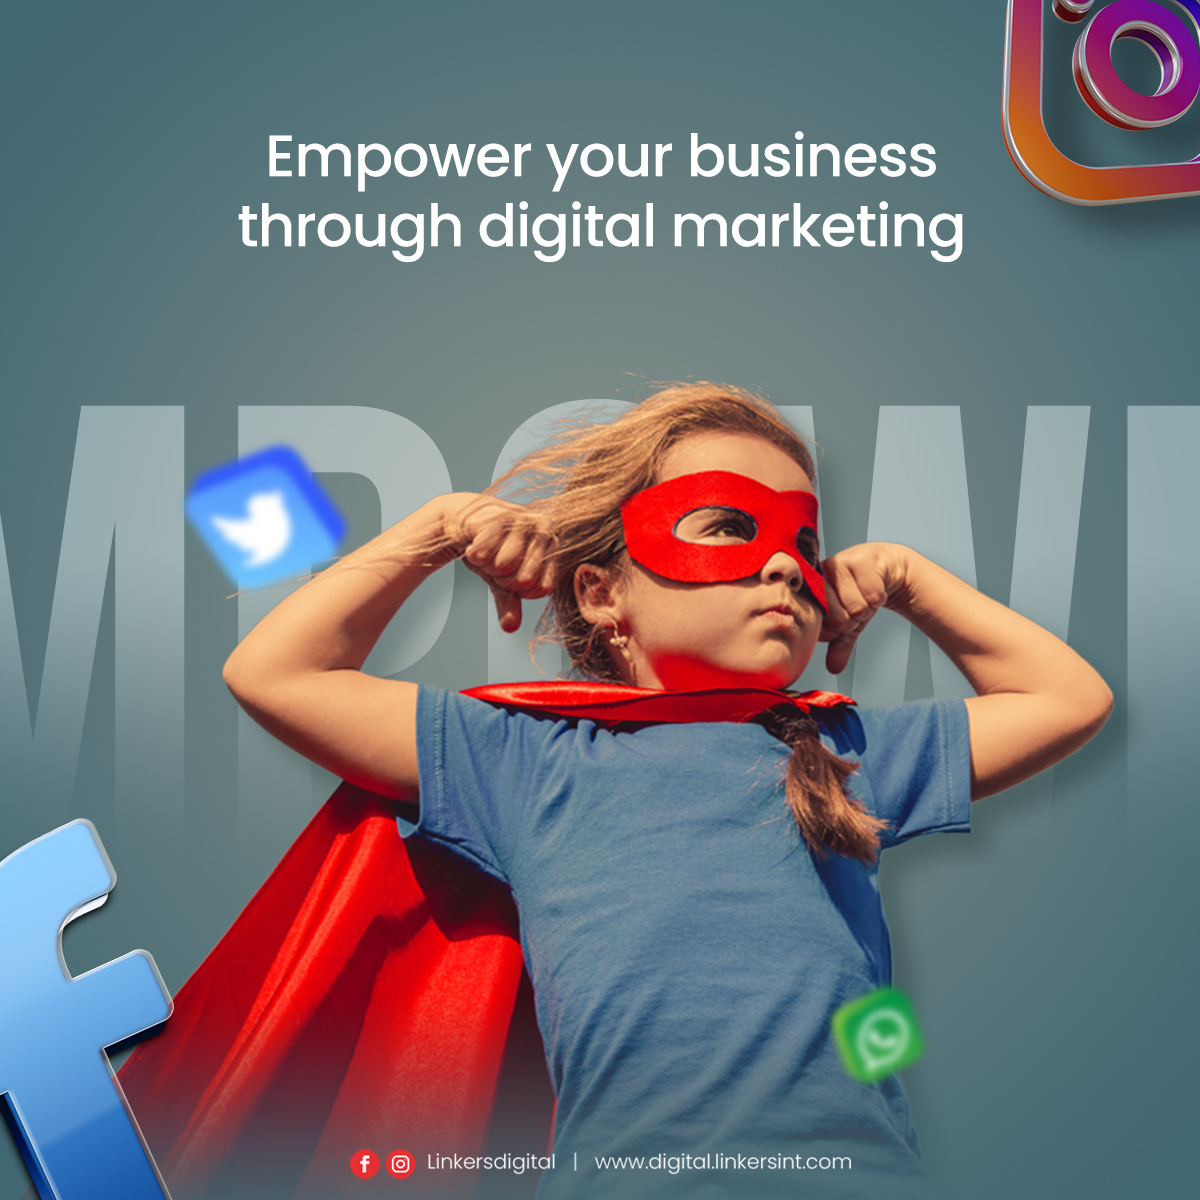 Grow your business with powerful digital marketing techniques. Improve your brand online presence, increase traffic, and conversions. Hand us all right over to shape your brand identity digitally. #businesses #business #digitalmarketing #digitalmarketingagency